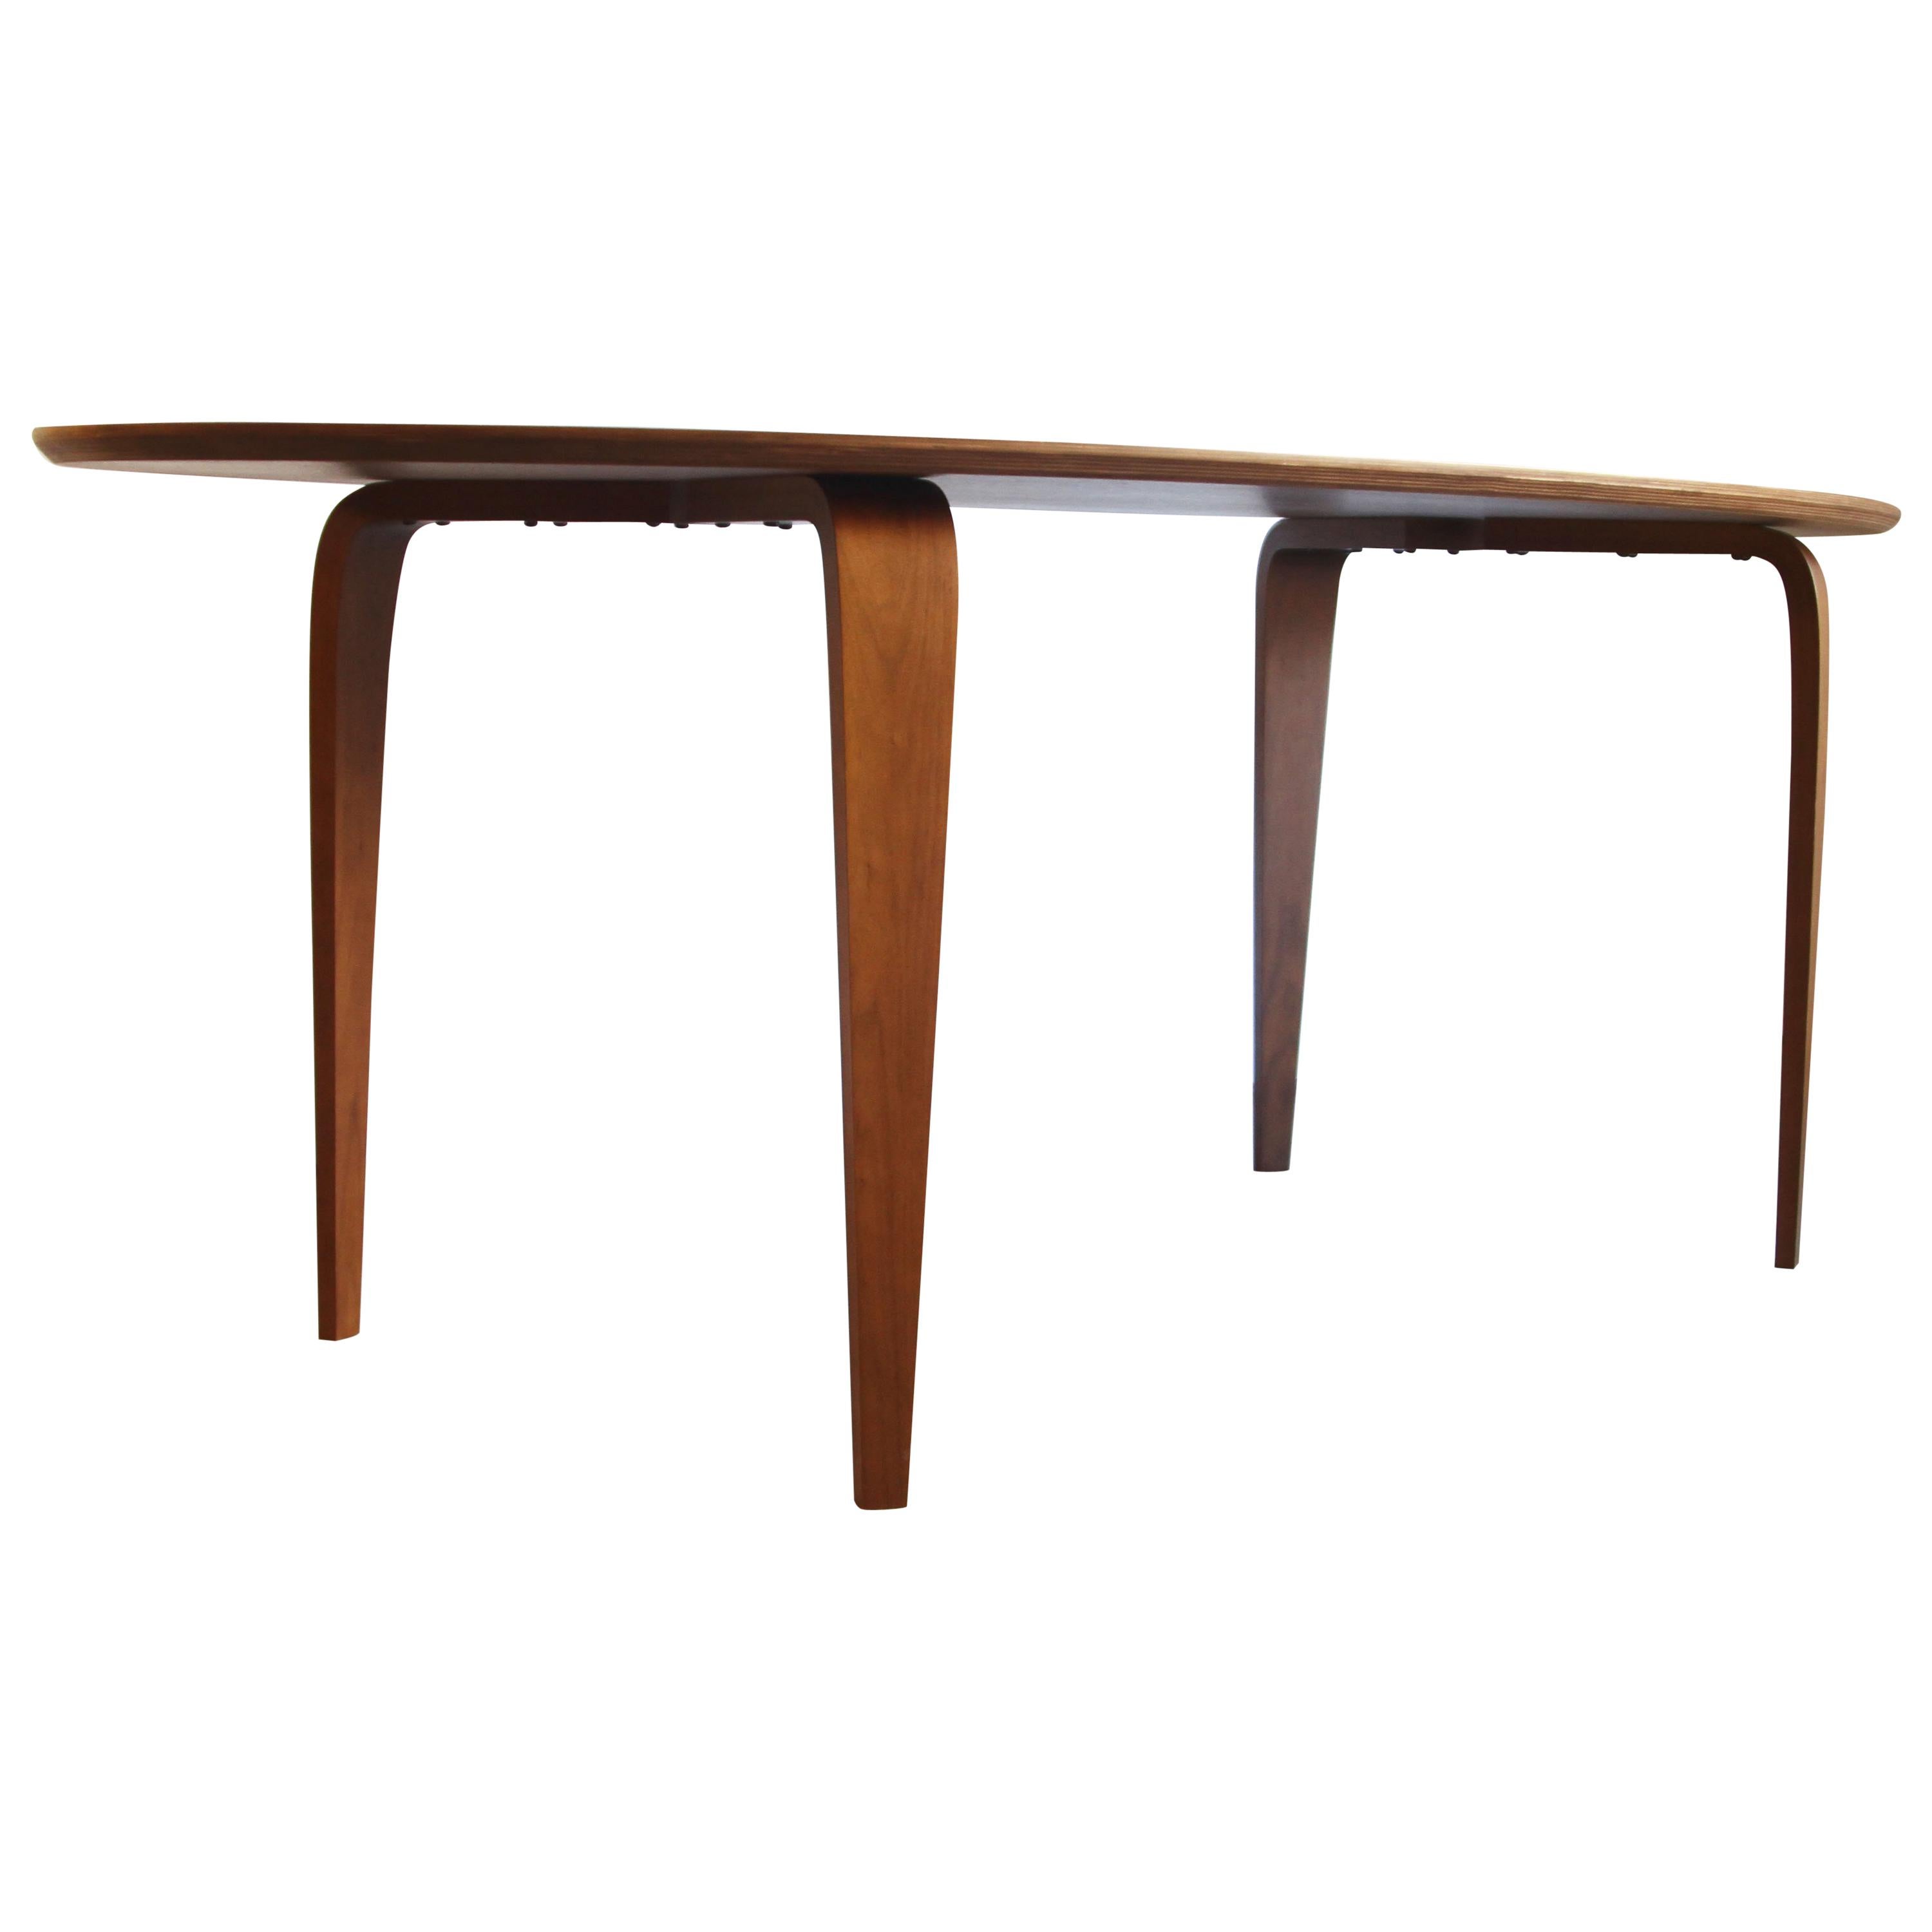 Norman Cherner Oval Dining Table